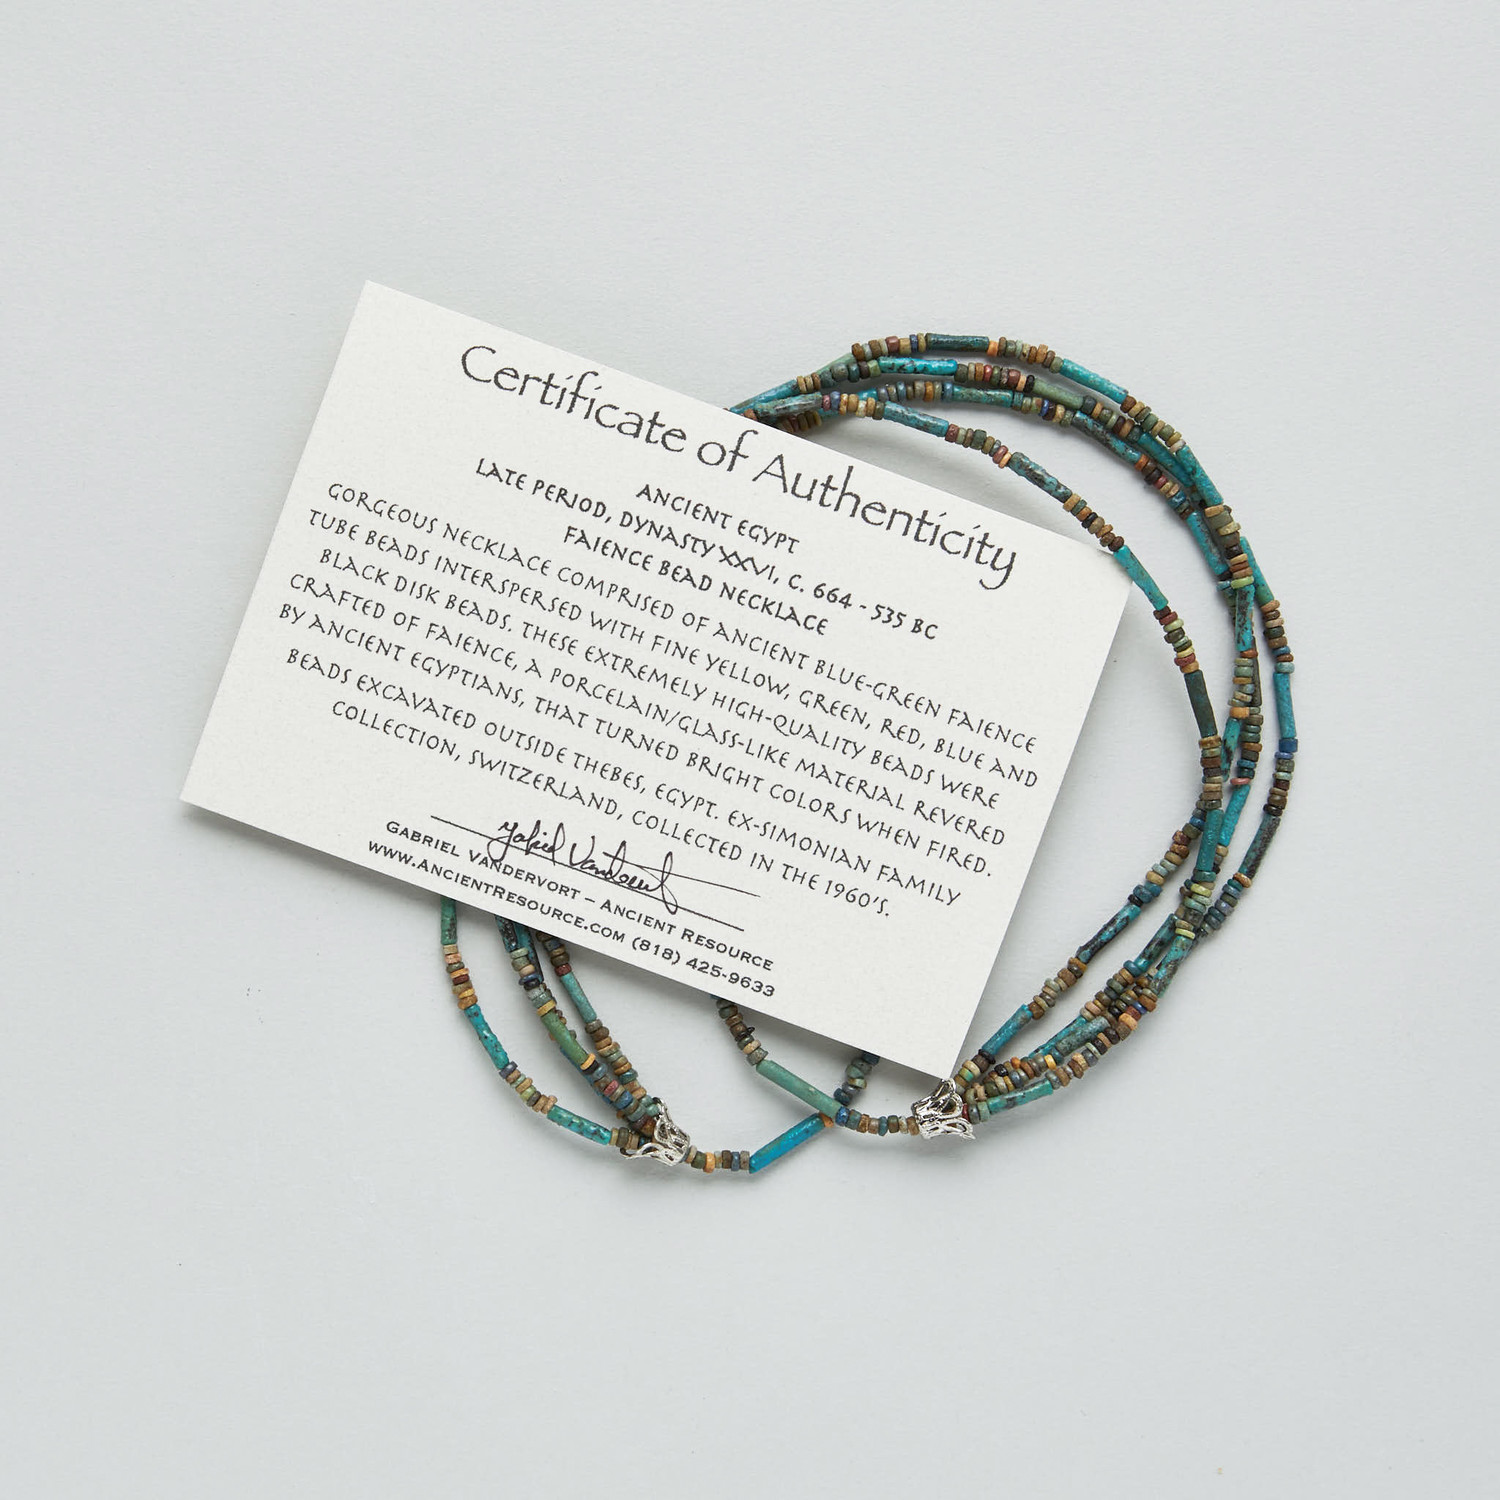 Ancient Egypt // 664-535 BC Bead Necklace - Ancient Resource - Touch of ...